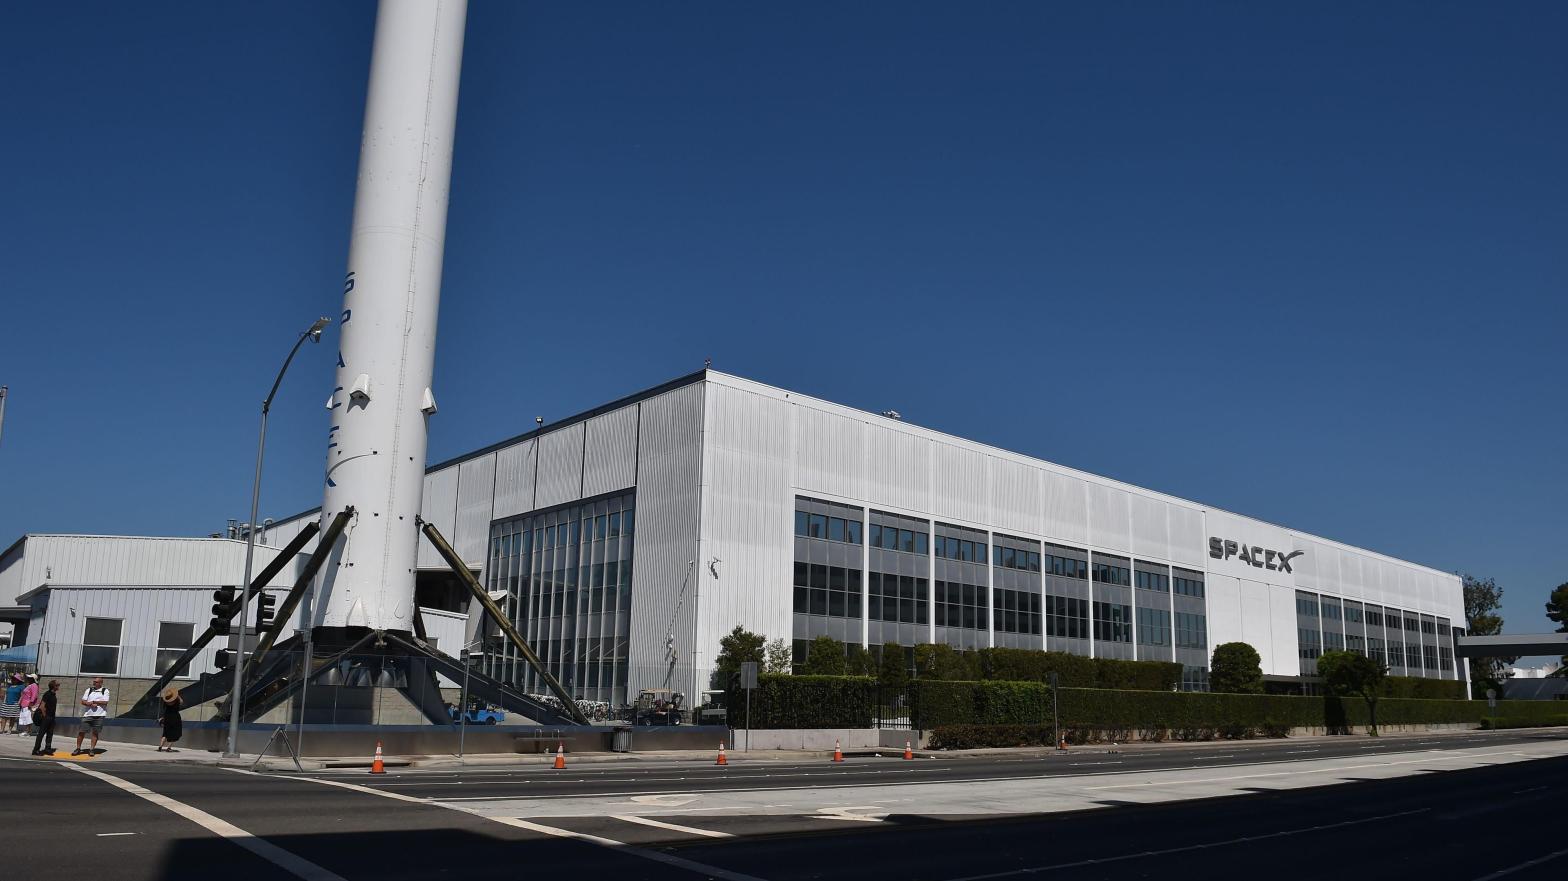 John Johnson said he worked at SpaceX's Hawthorne, California facility before being moved to Washington. In that time, he claimed he was being perpetually shafted by management in favour of younger employees. (Photo: ROBYN BECK/AFP, Getty Images)